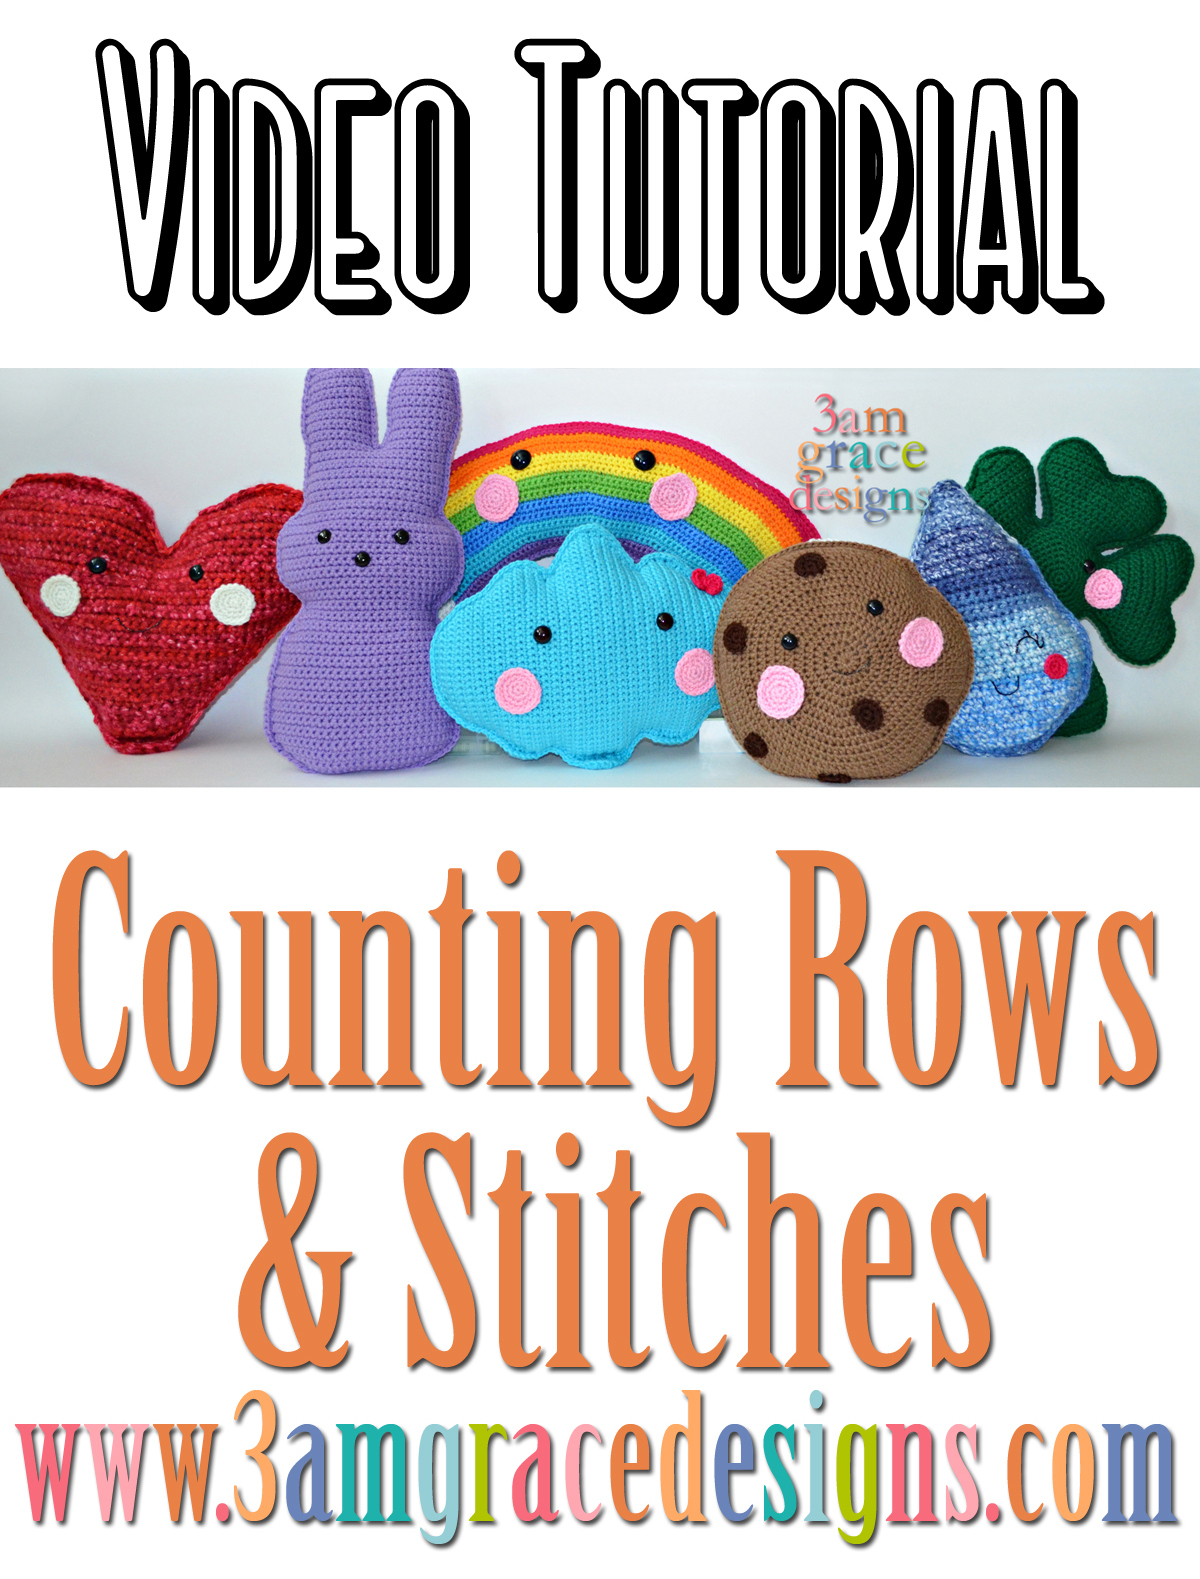 How To: Counting Rows & Stitches